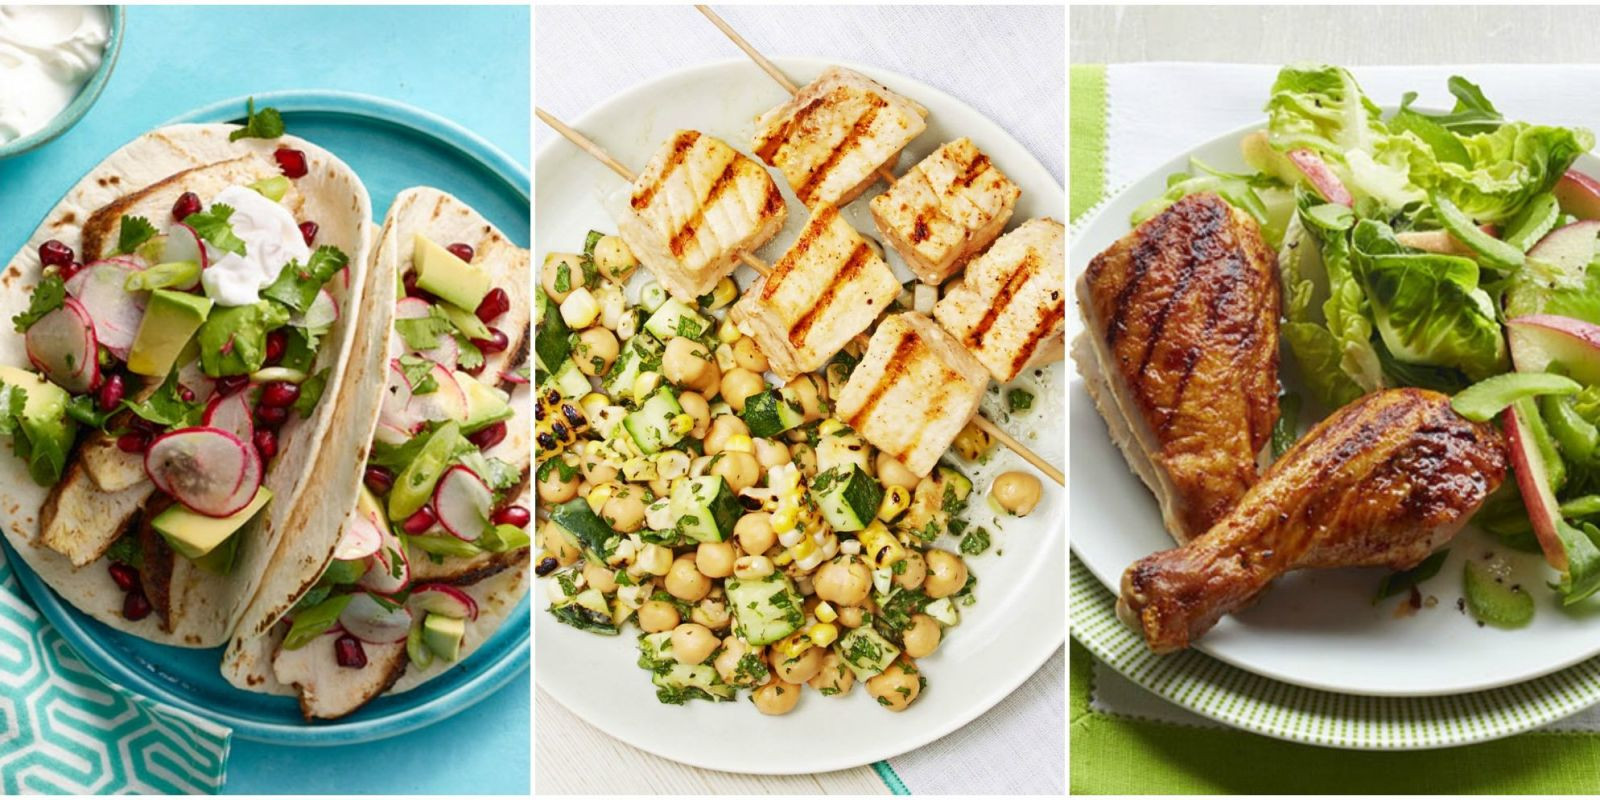 Easy Summer Dinners
 60 Best Summer Dinner Recipes Quick and Easy Summer Meal